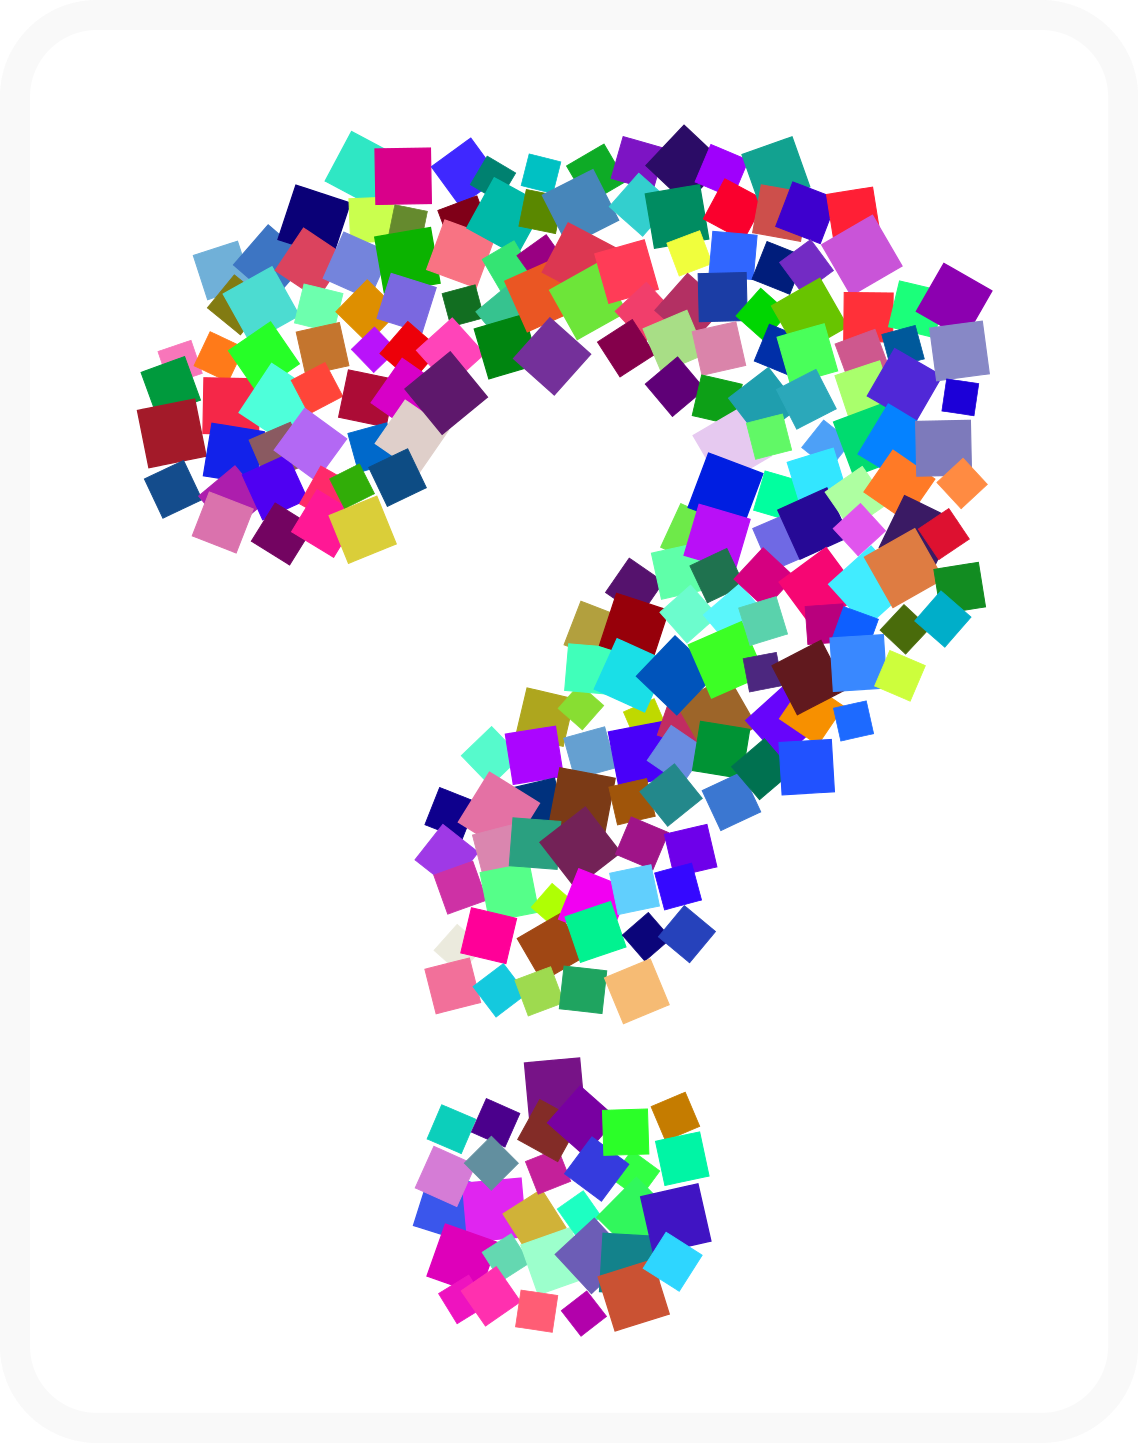 File:Question mark alternate.svg - Wikimedia Commons